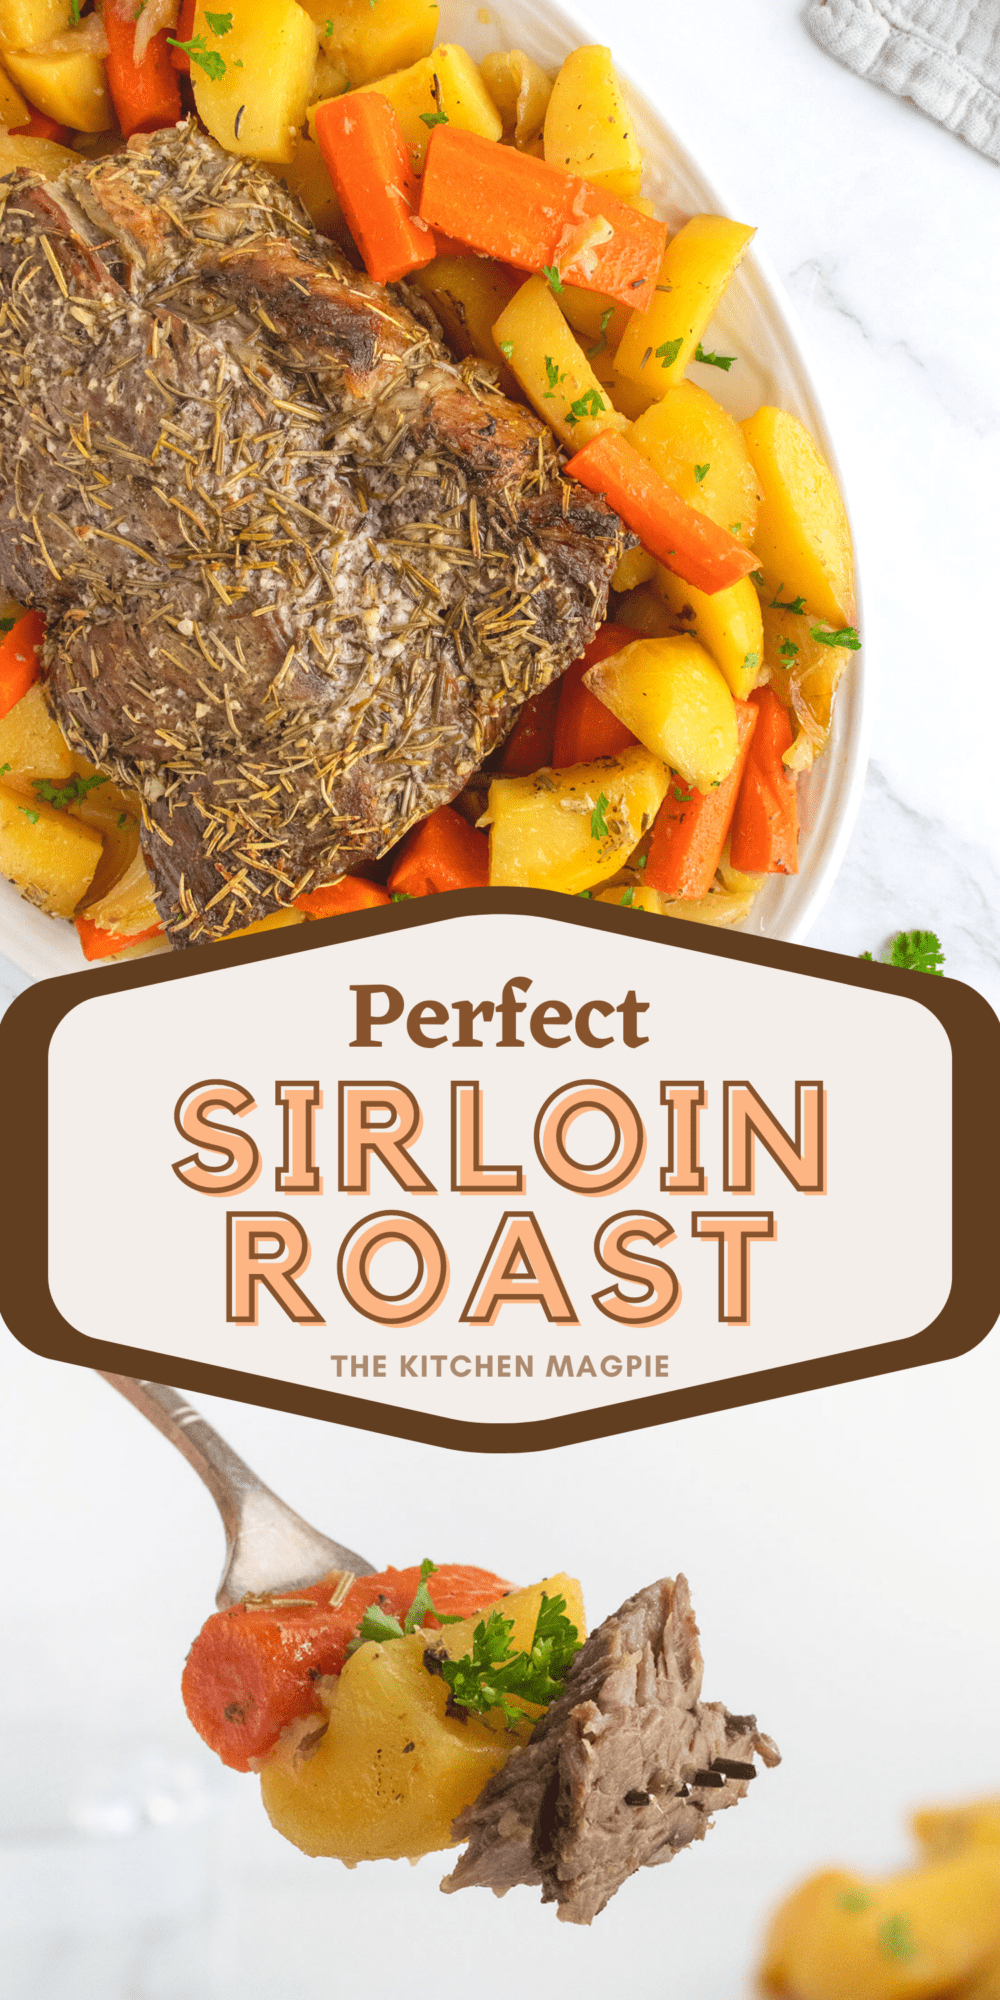 Learning the proper way to cook a top sirloin roast is going to help you turn this cheaper cut of beef into a fabulous family dinner! #topsirloin #roastbeef #recipe